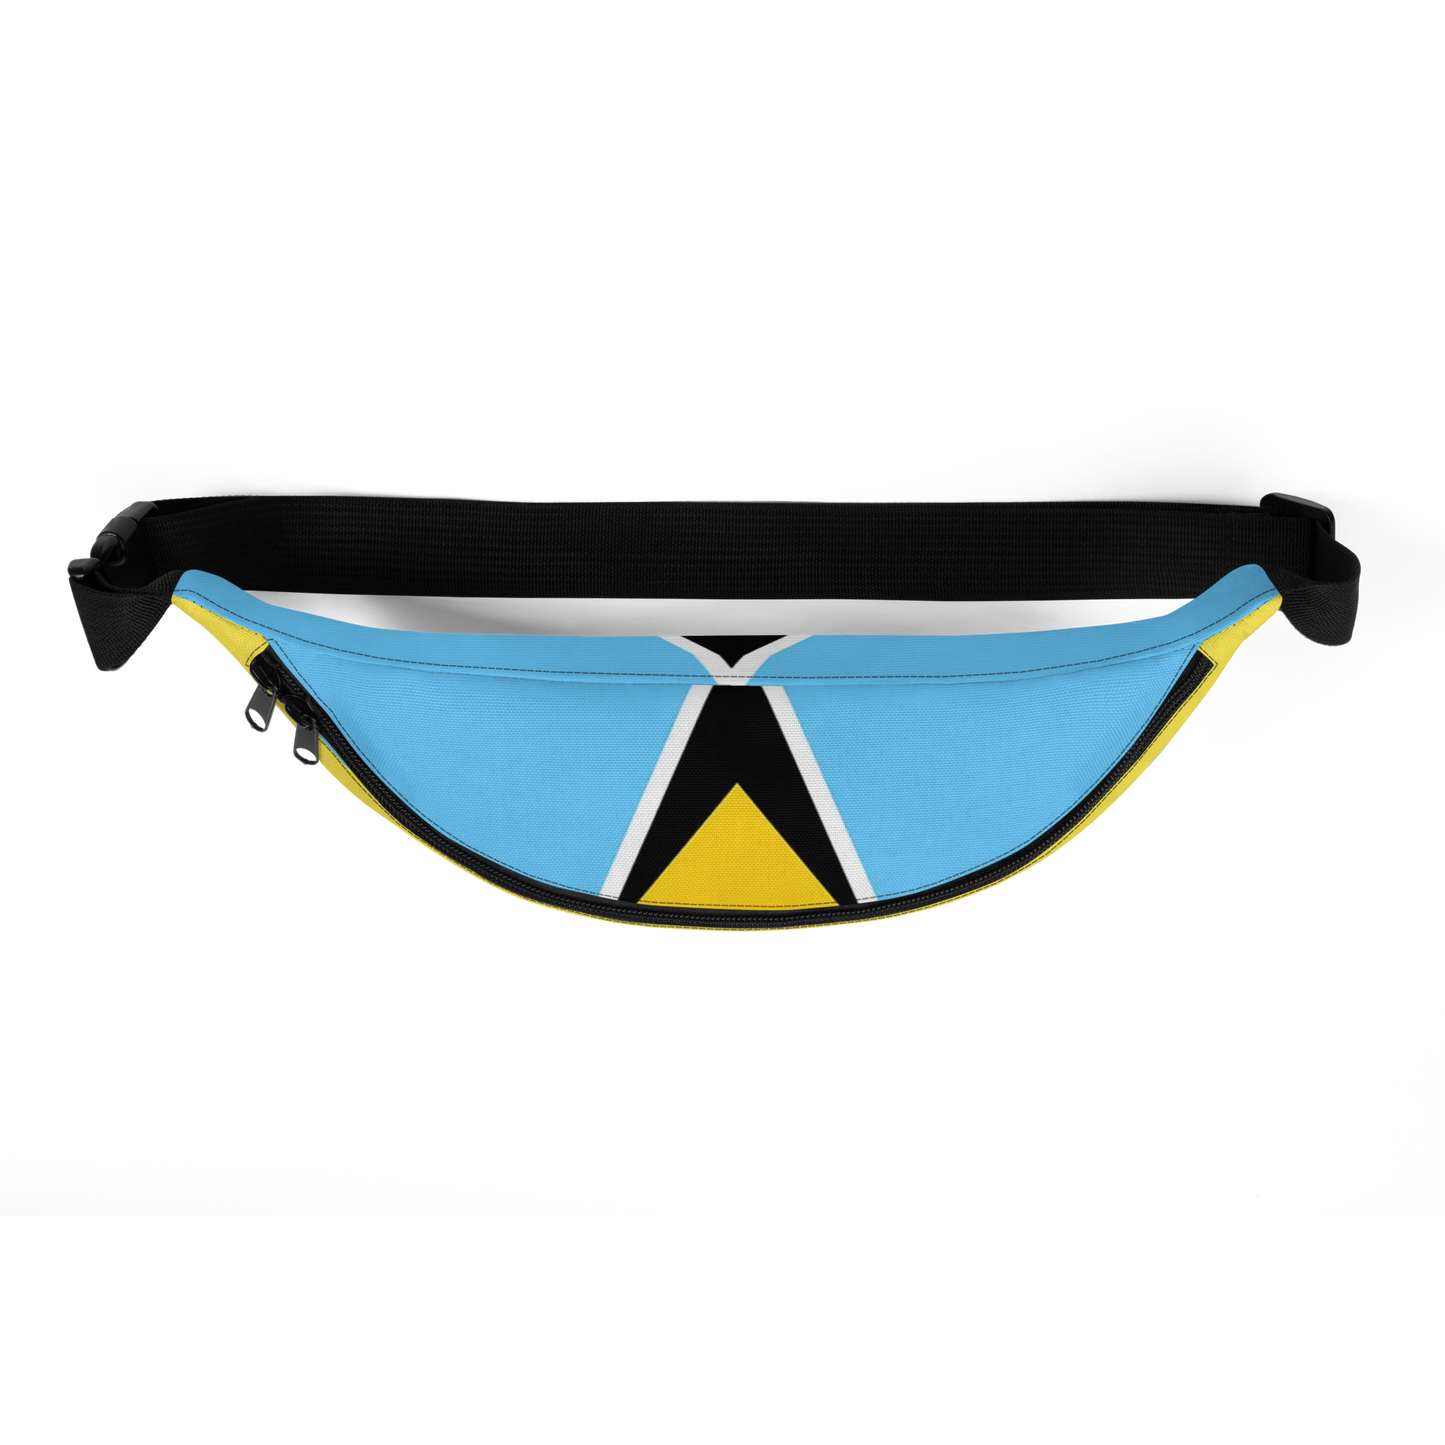 I Am Rooting: St. Lucia Fanny Pack